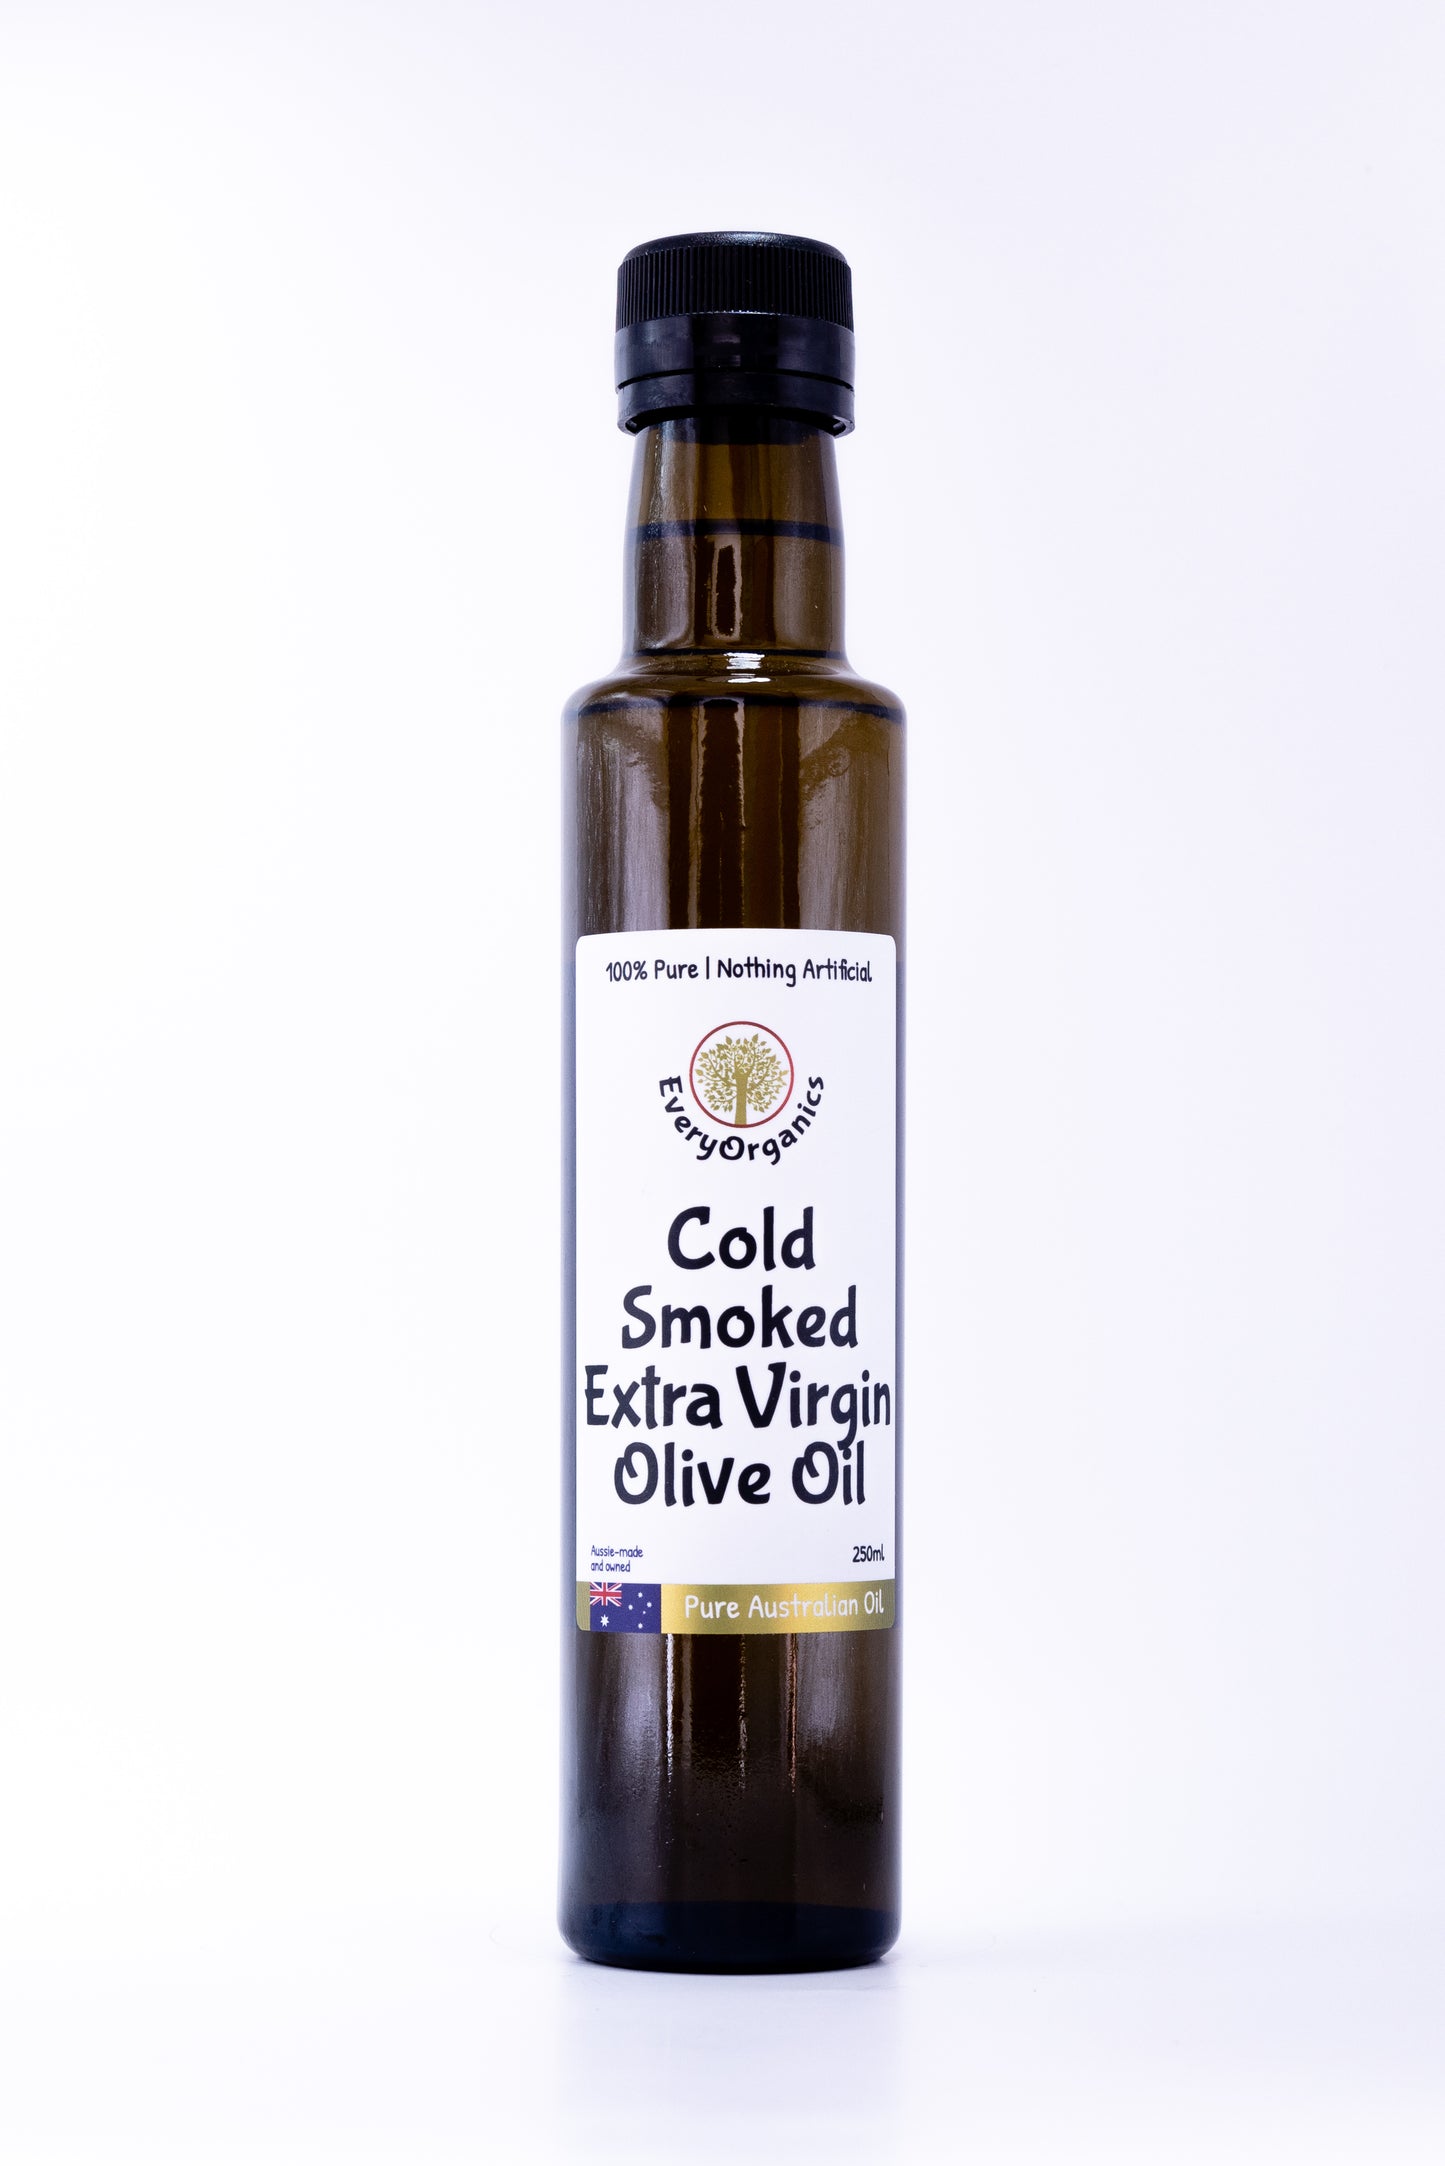 Cold Smoked Pure Australian Extra Virgin Olive Oil x1